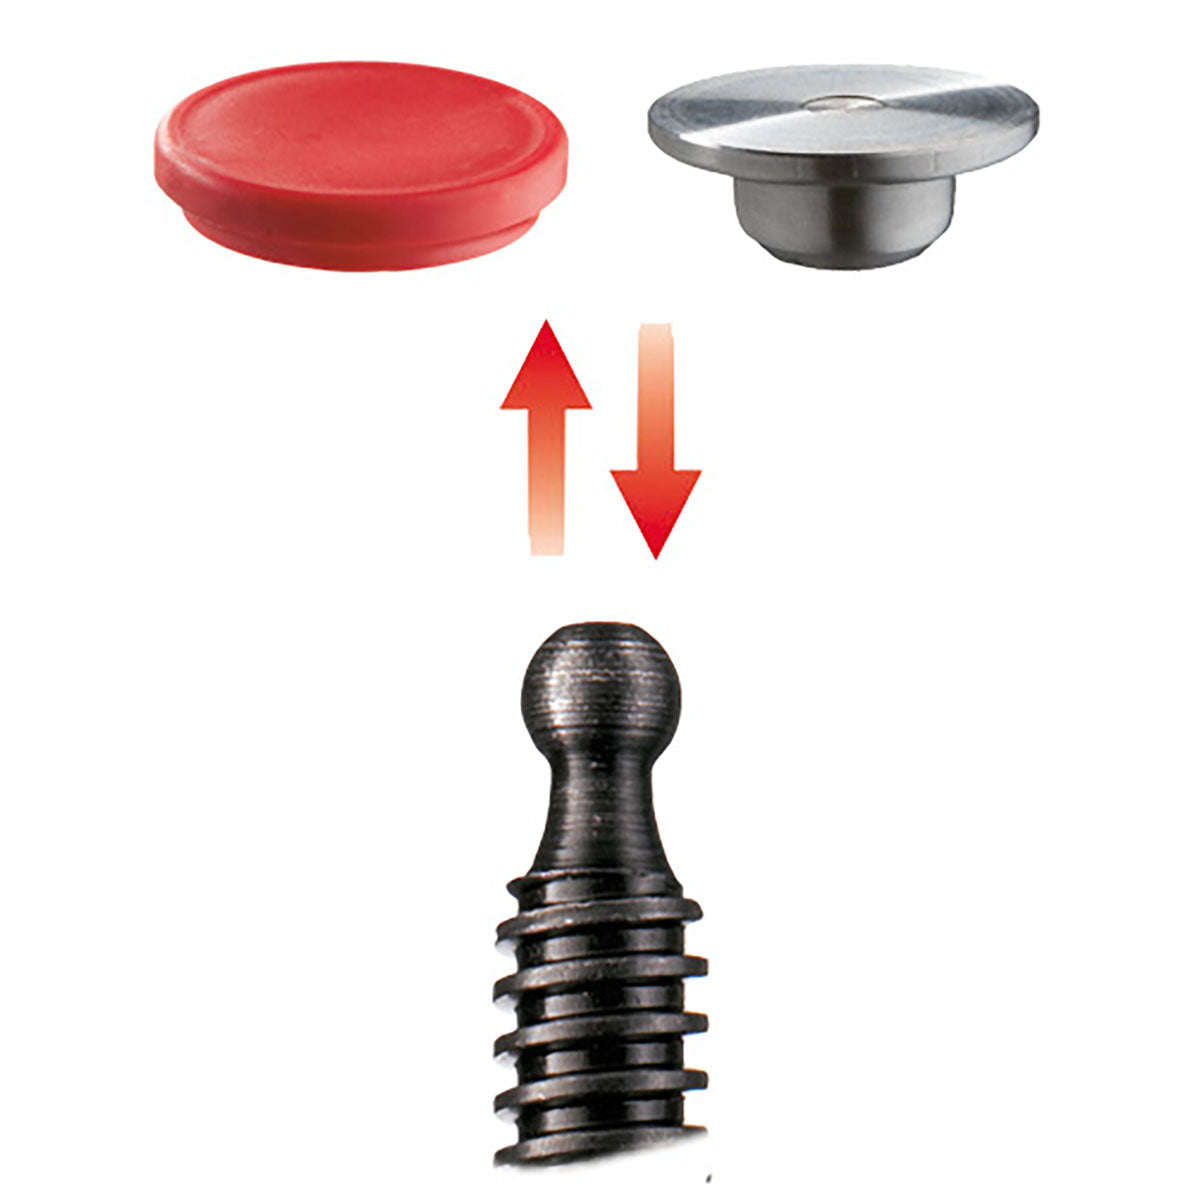 Bessey TG40S10-2K - Tightening screw with two-component handle Bessey TG 400/100